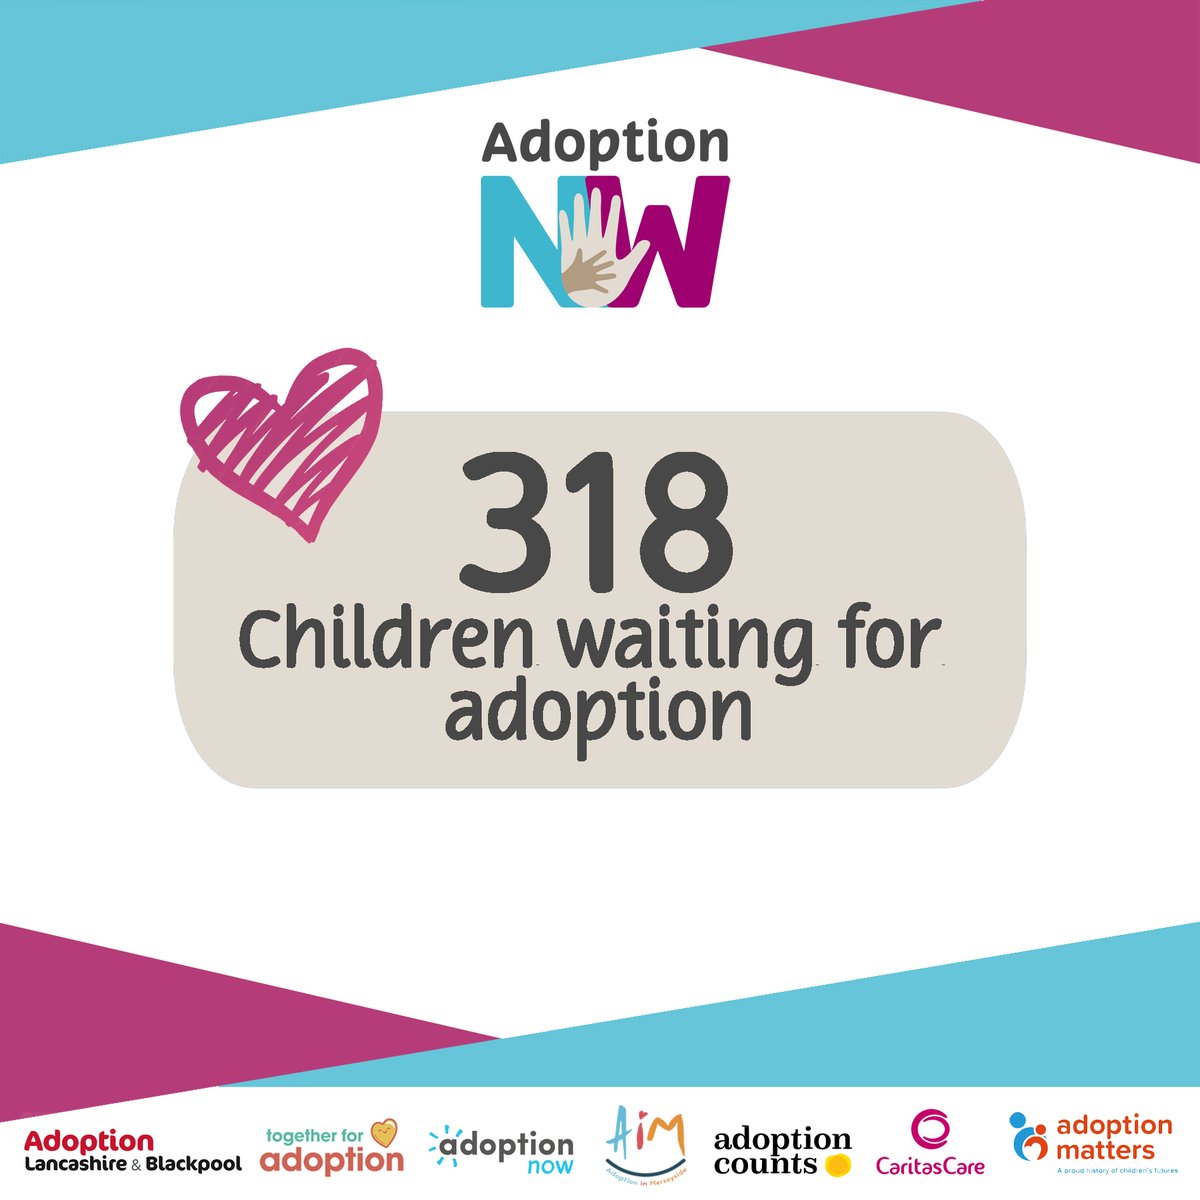 There are 318 children waiting to be adopted in the North West right now. We are urging people who are thinking of adopting to contact us to find out more about the joys of adopting a child over 3. Find out more: adoptionnorthwest.co.uk #GrowingFamiliesTogether #YouCanAdopt